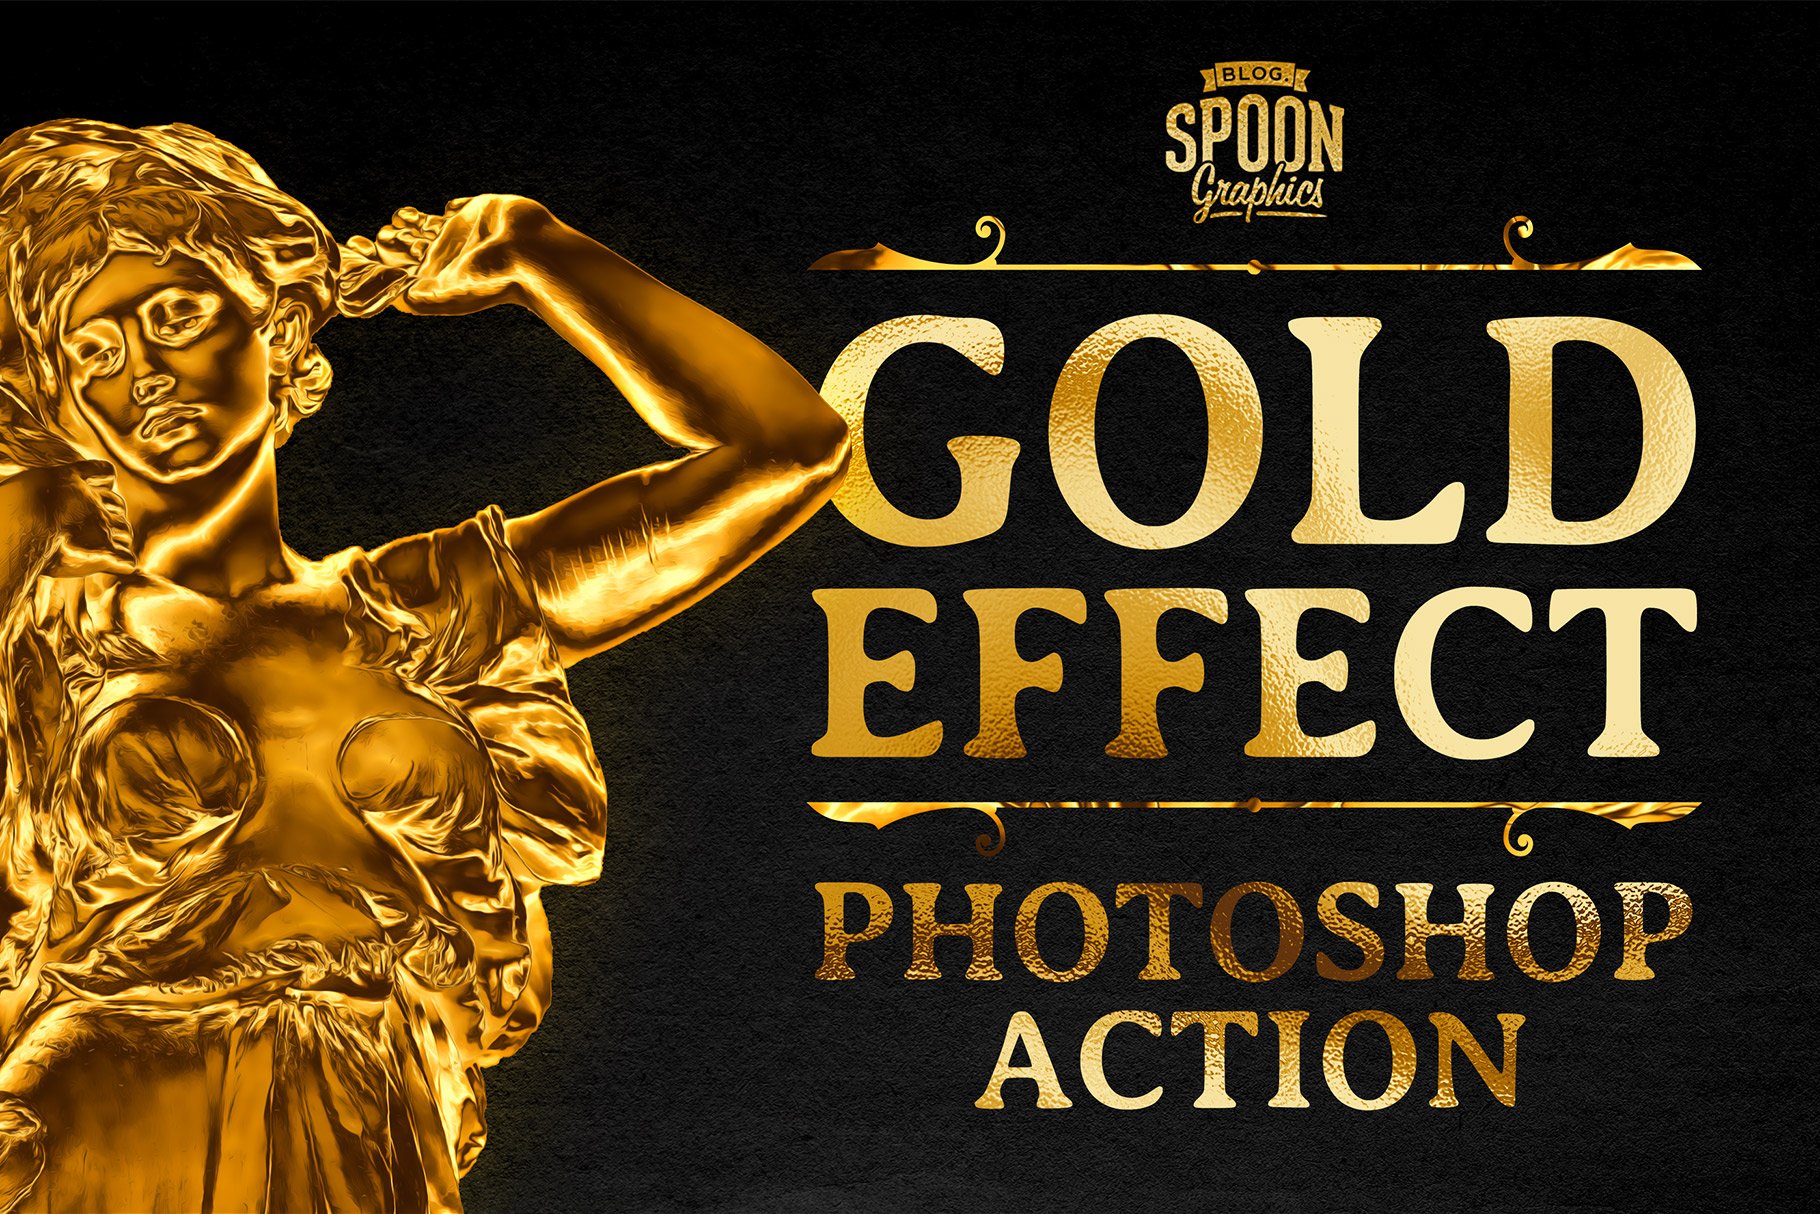 Turn Anything into Gold in Photoshopcover image.